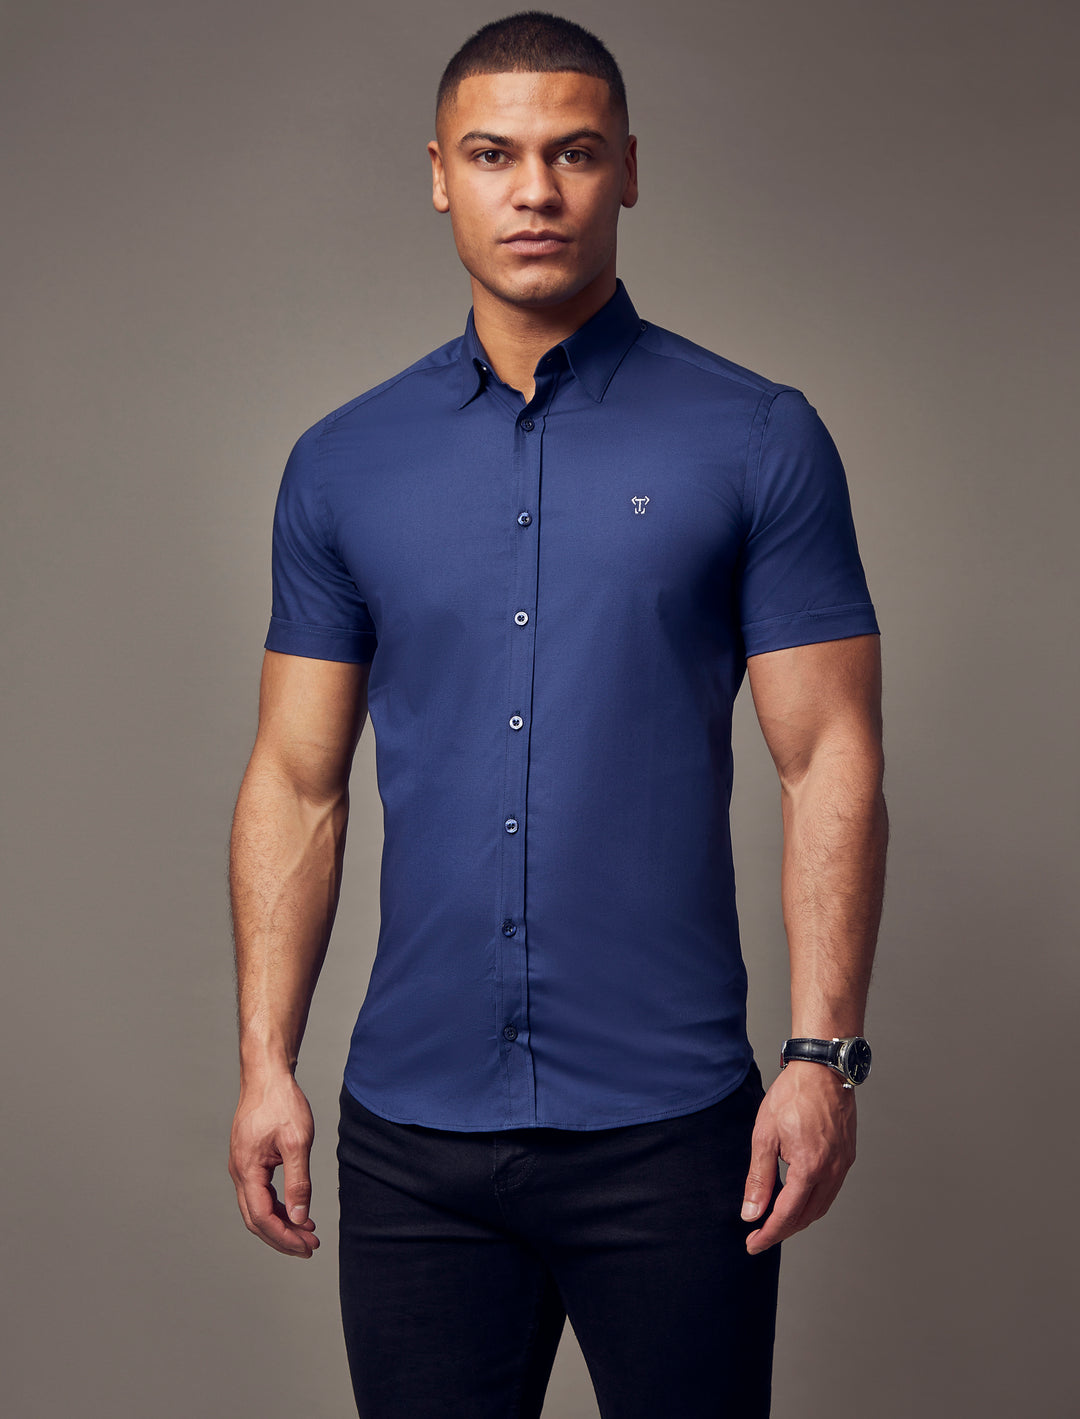 avy muscle fit short sleeve shirt, highlighting the tapered fit and premium quality offered by Tapered Menswear